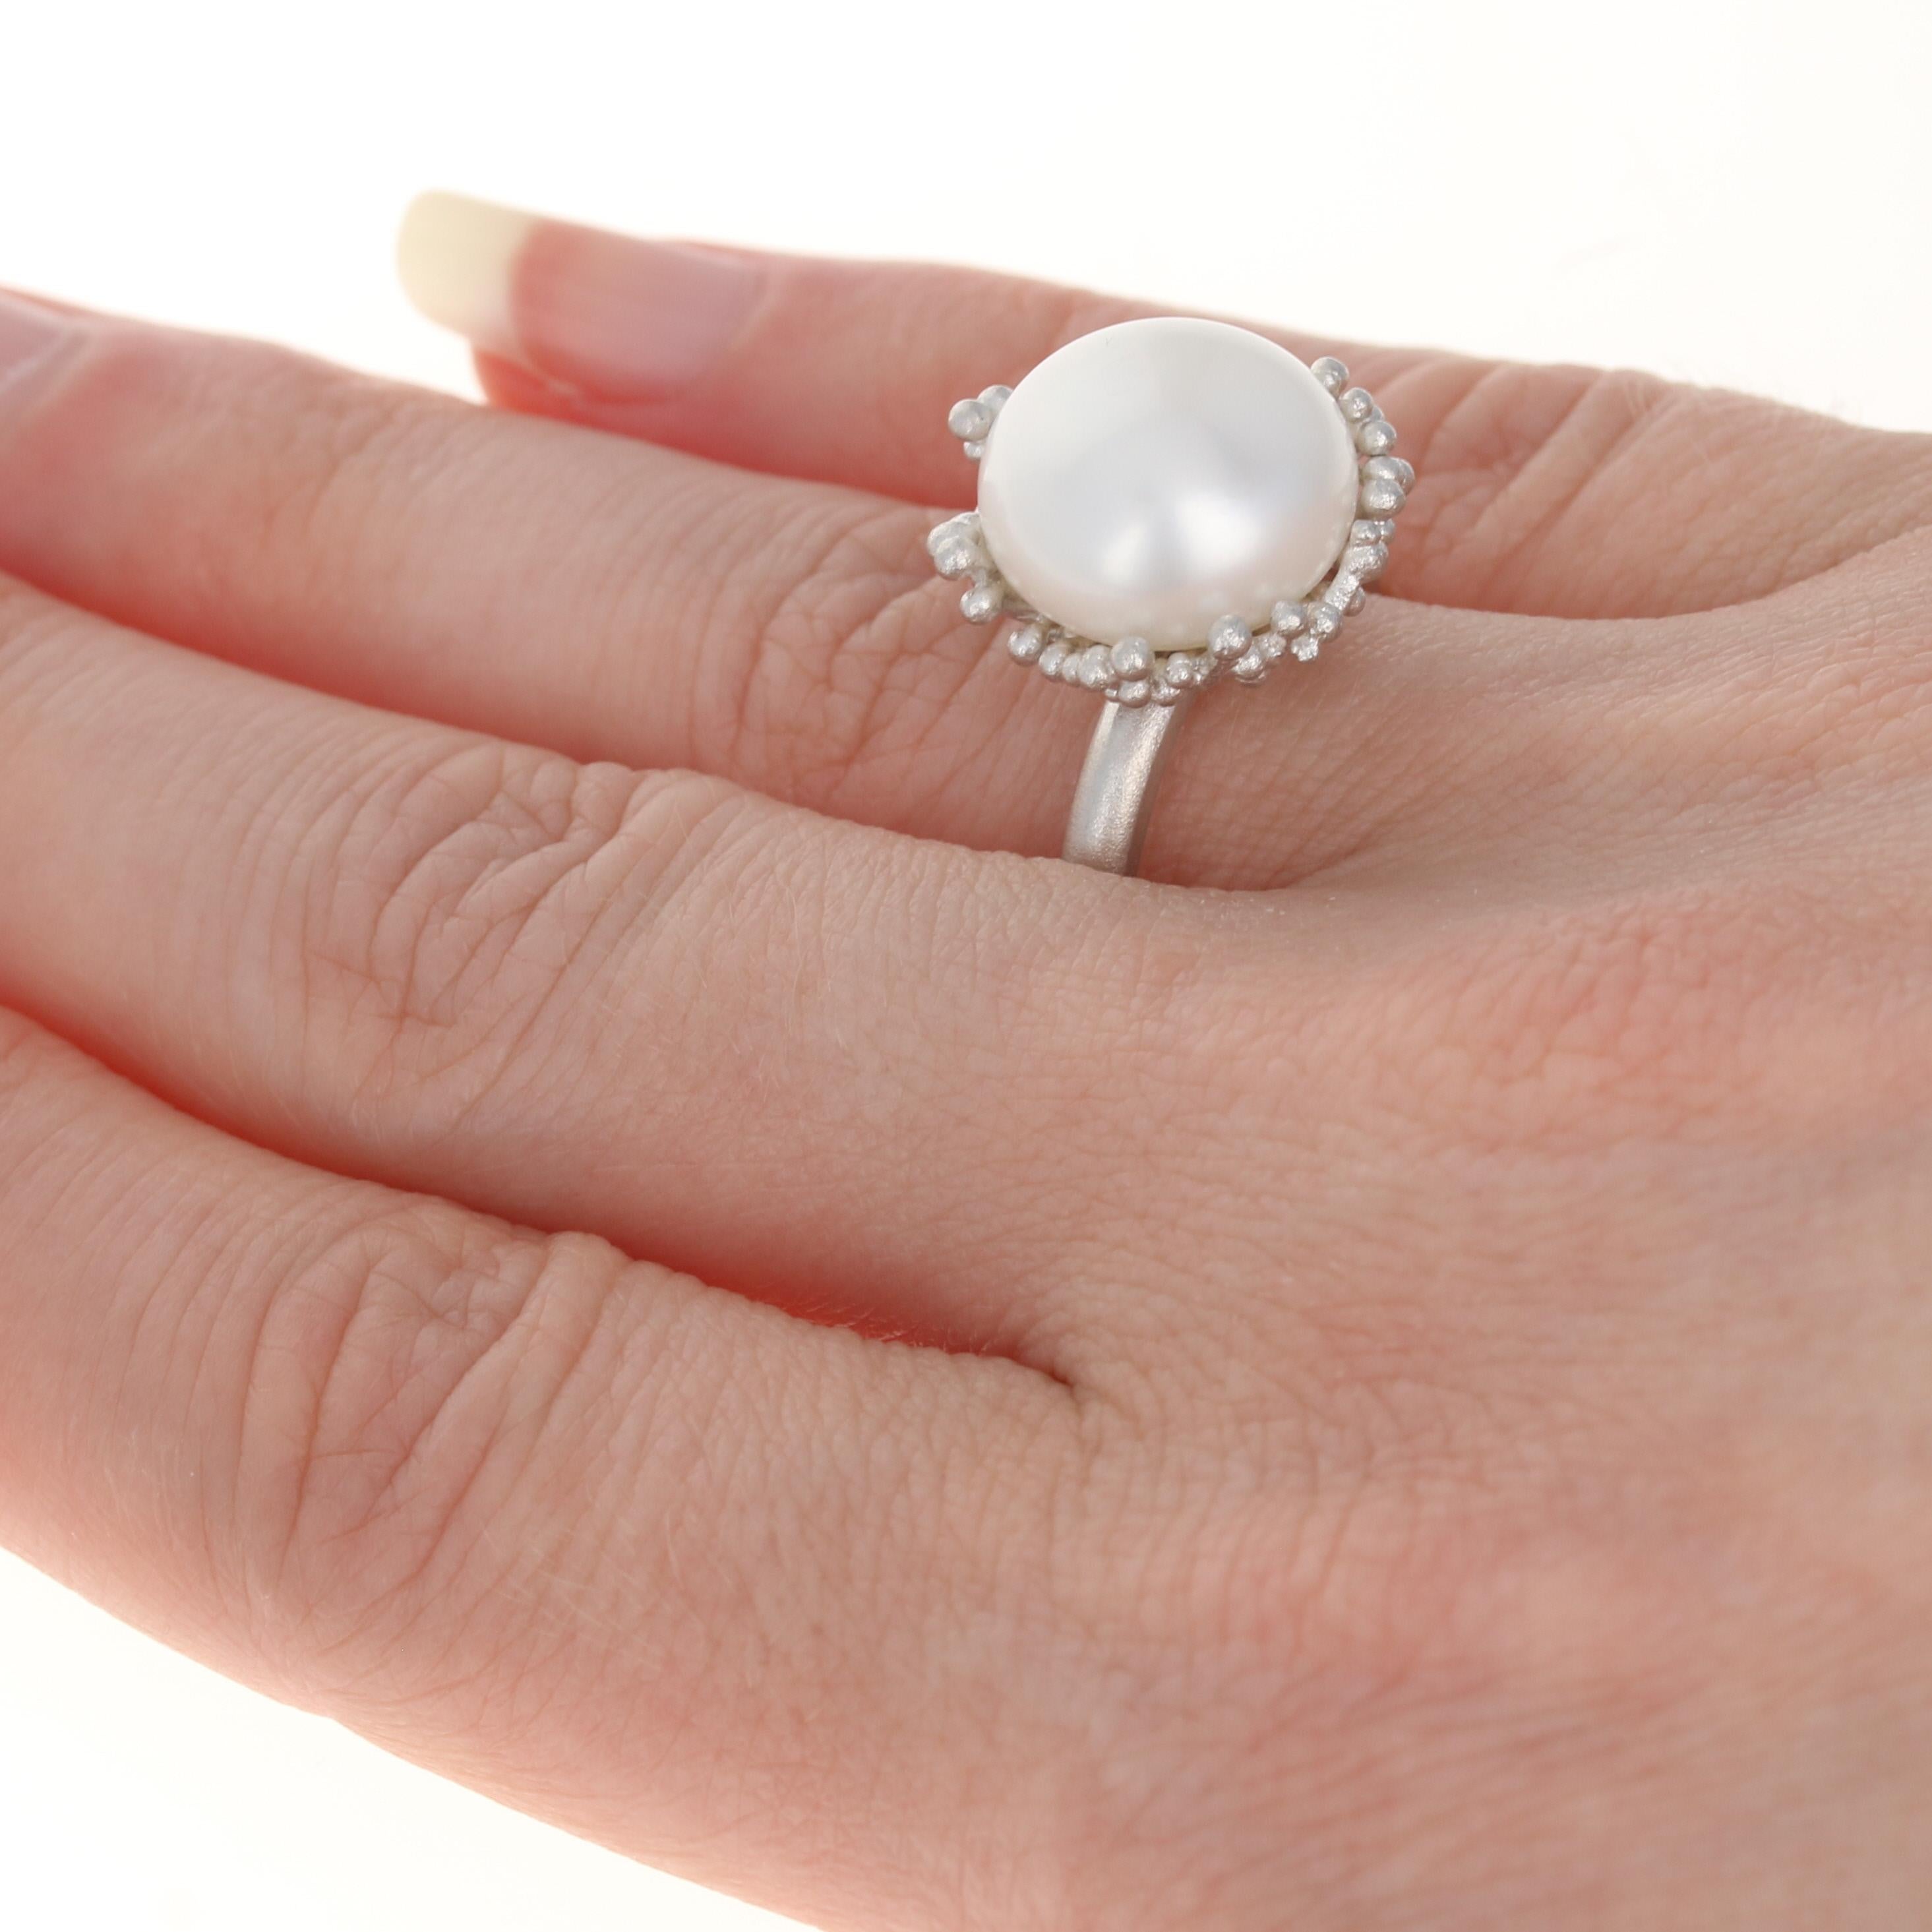 For Sale:  New Bastian Inverun Freshwater Pearl Ring Brushed Sterling Silver 7.5 Statement 4